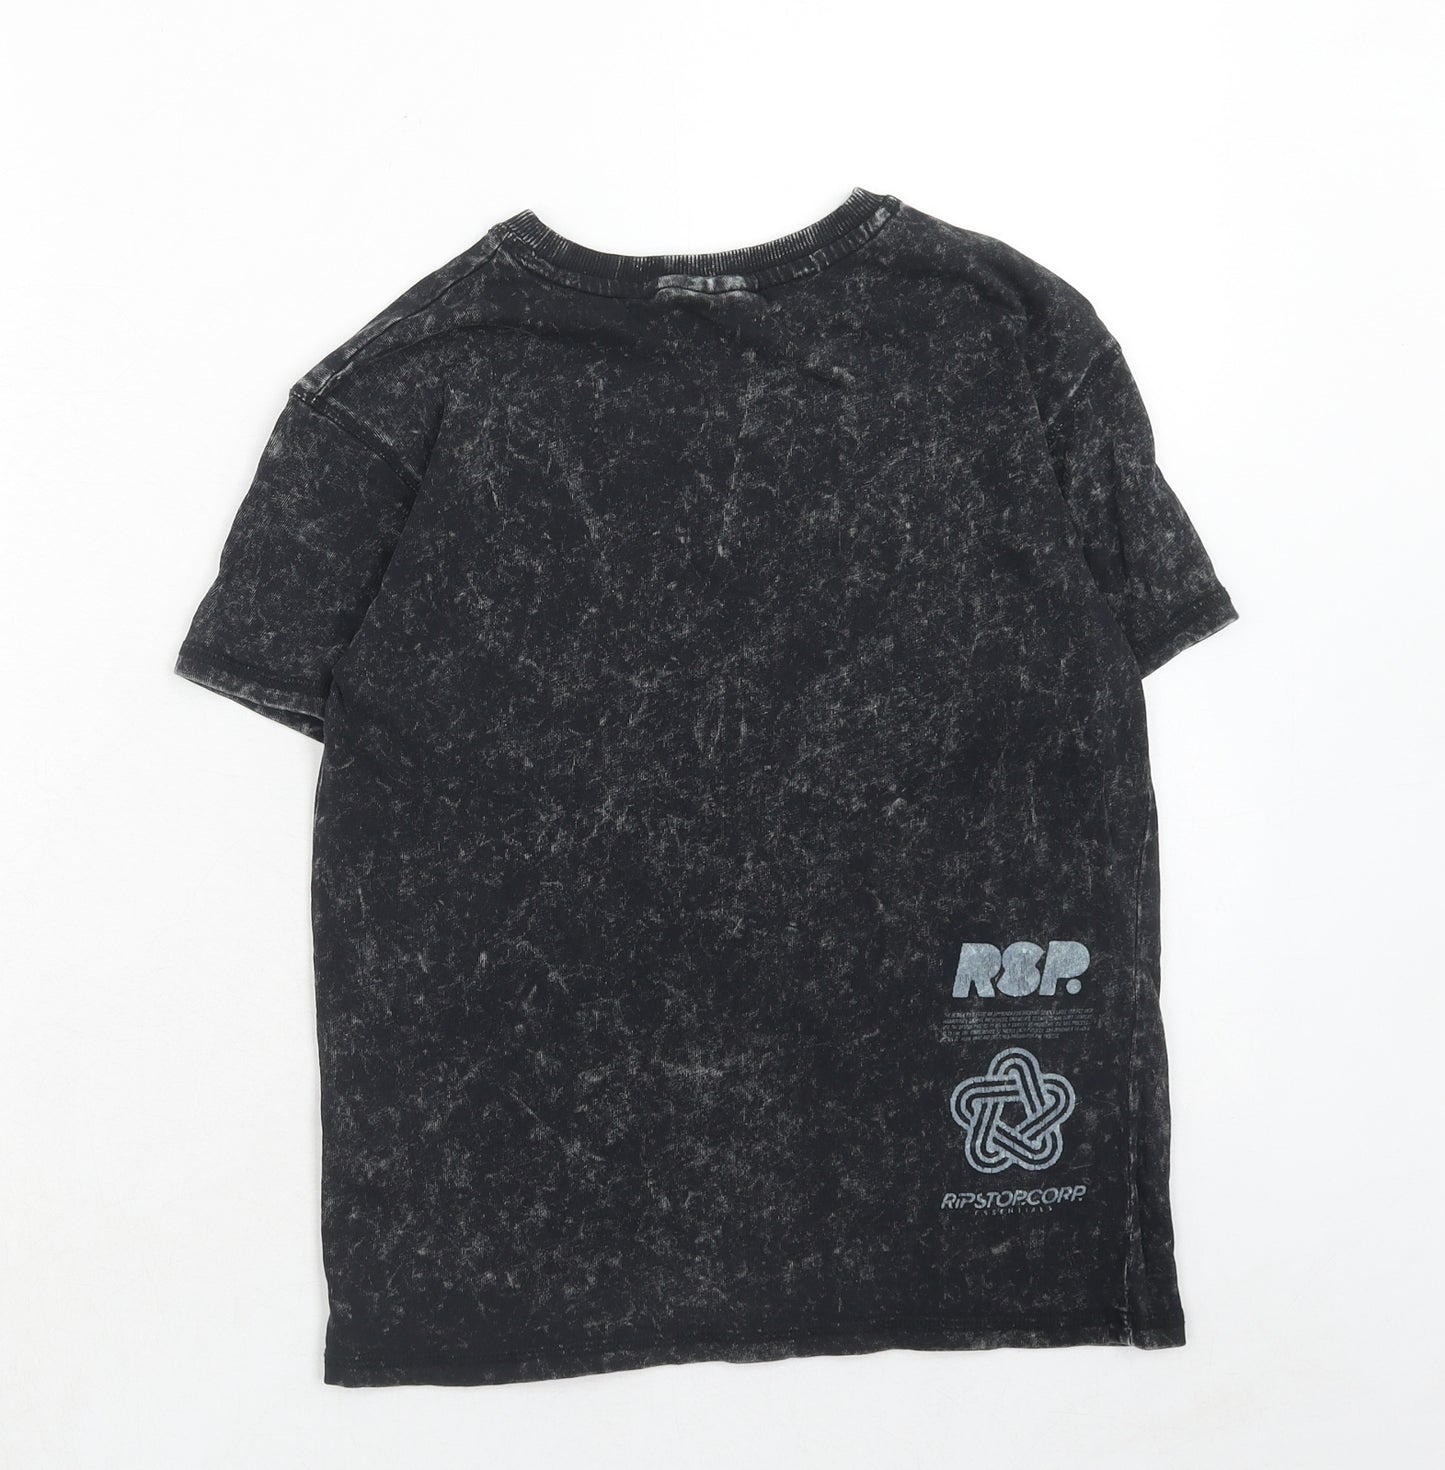 Ripstop Boys Black Cotton Basic T-Shirt Size 7-8 Years Round Neck Pullover